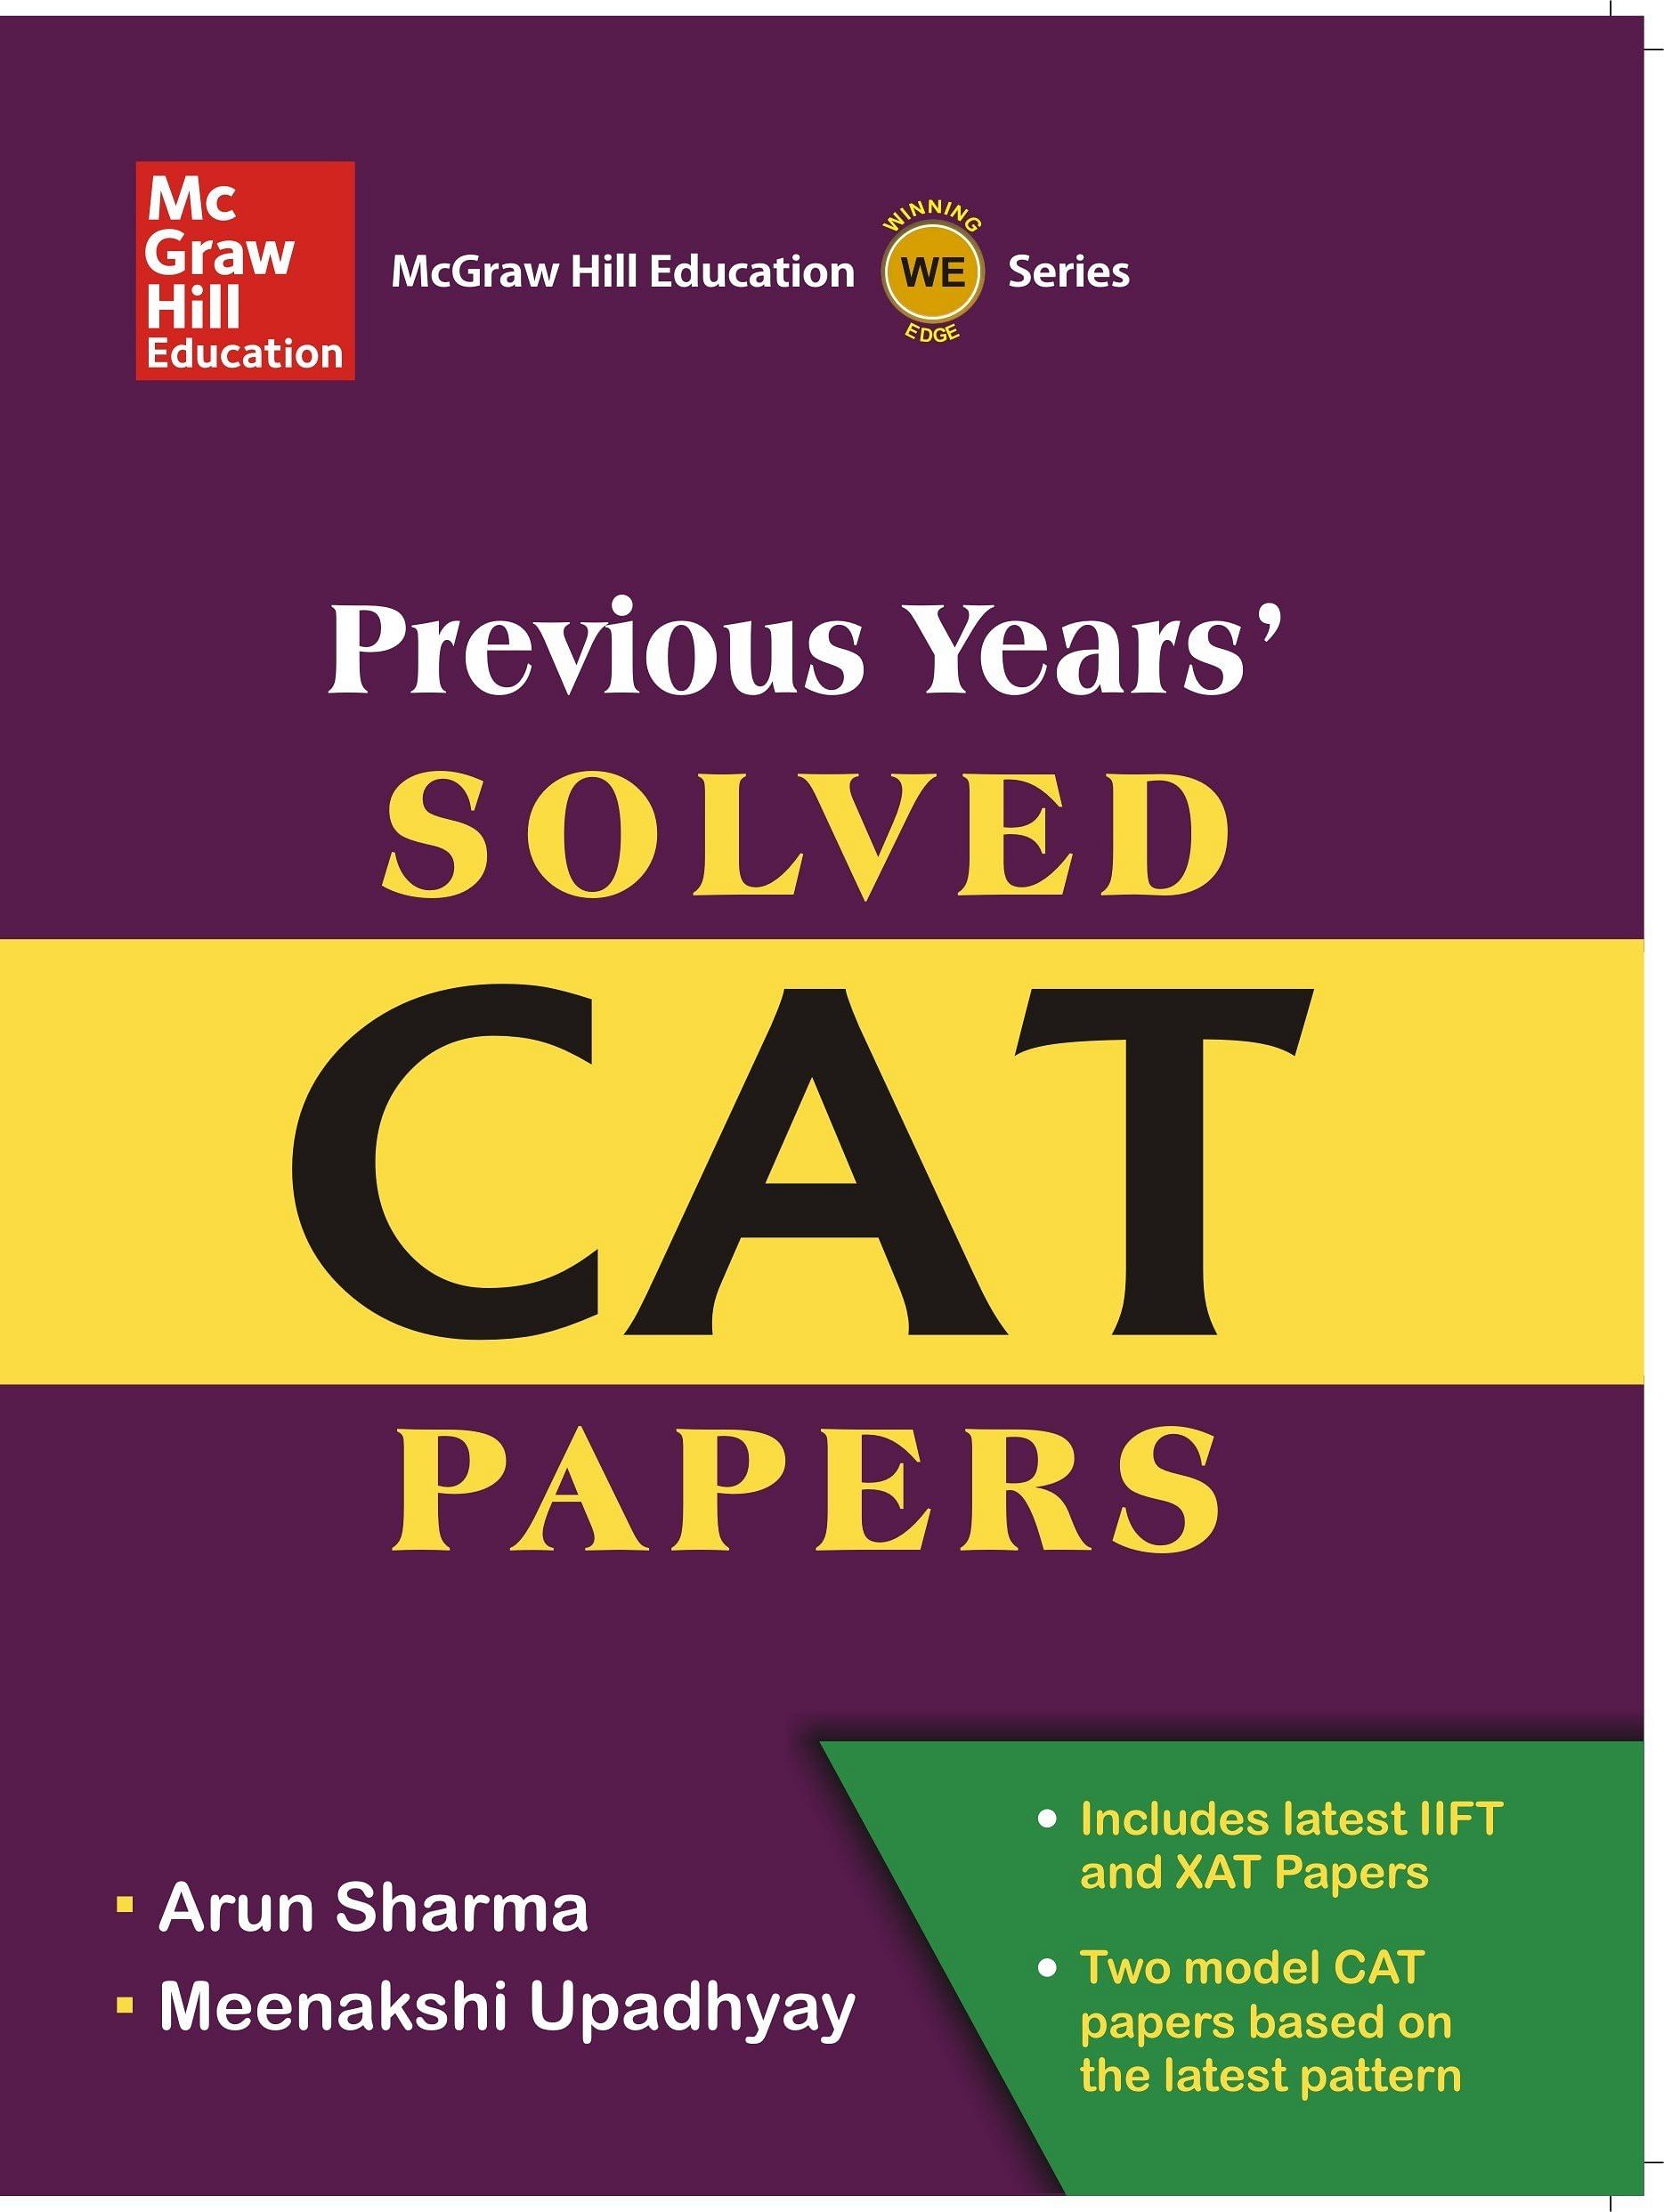 Previous Years Solved CAT Papers